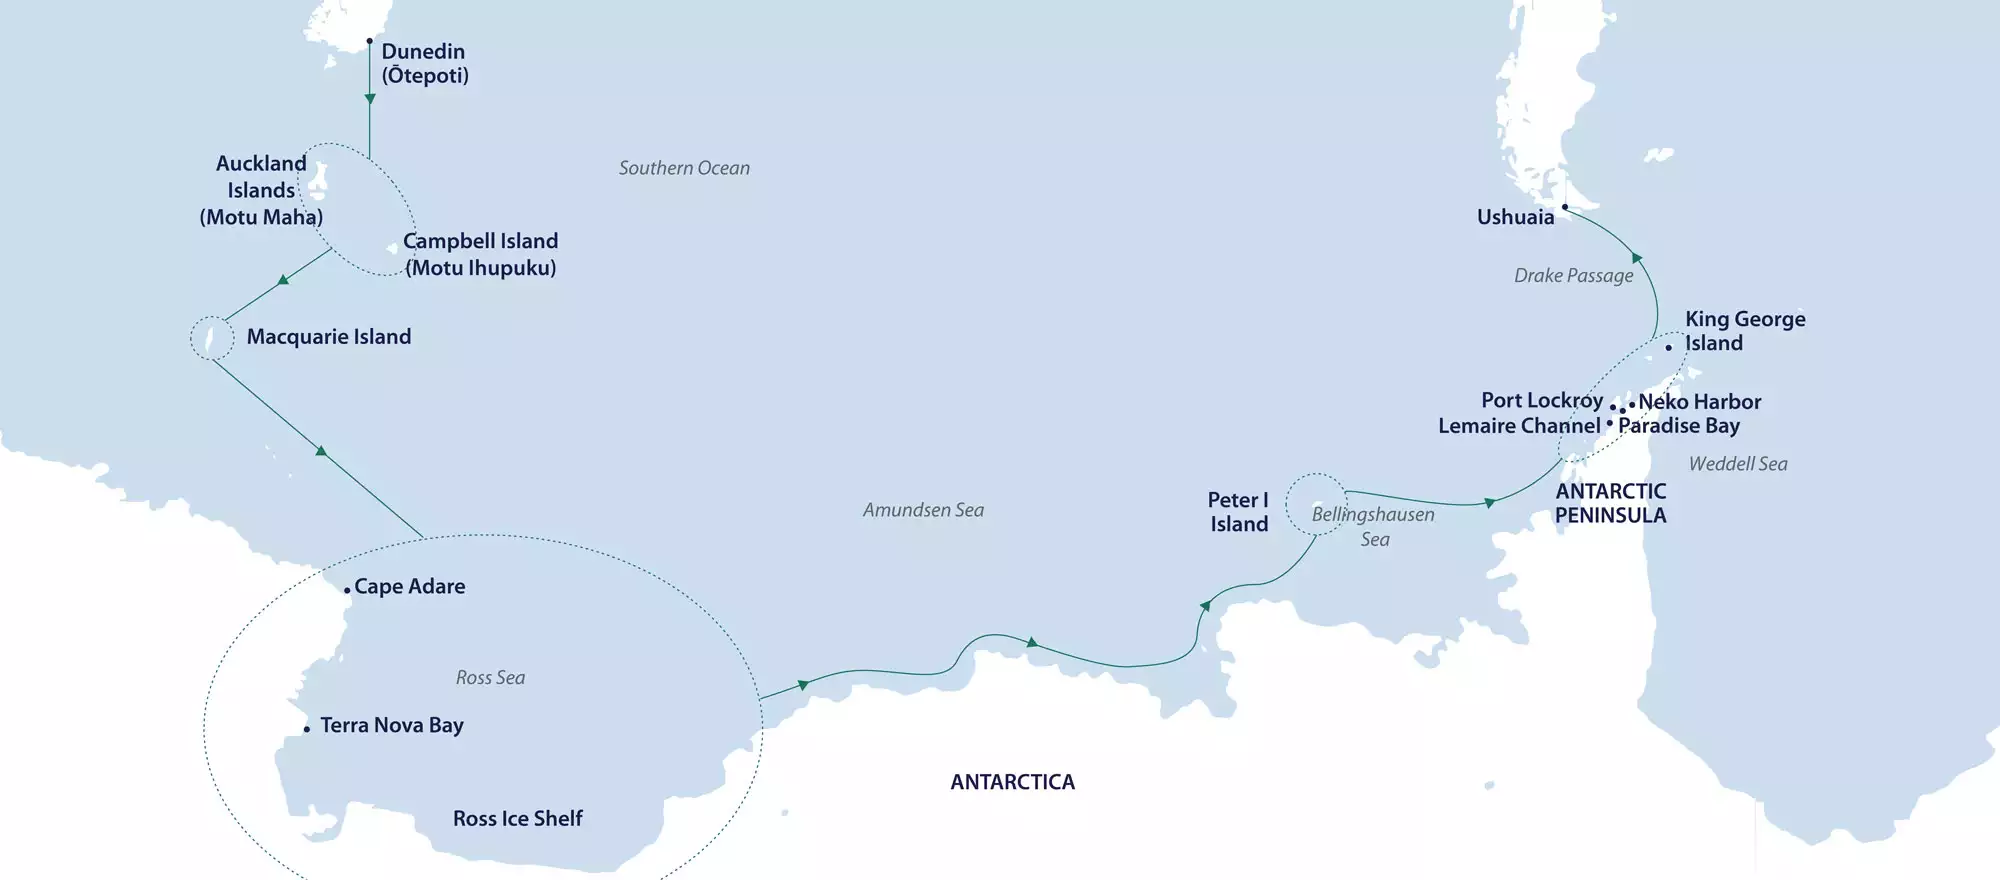 Route map of Epic Antarctica: Crossing the 7th Continent cruise from Dunedin, New Zealand to Ushuaia, Argentina via west Antarctica.